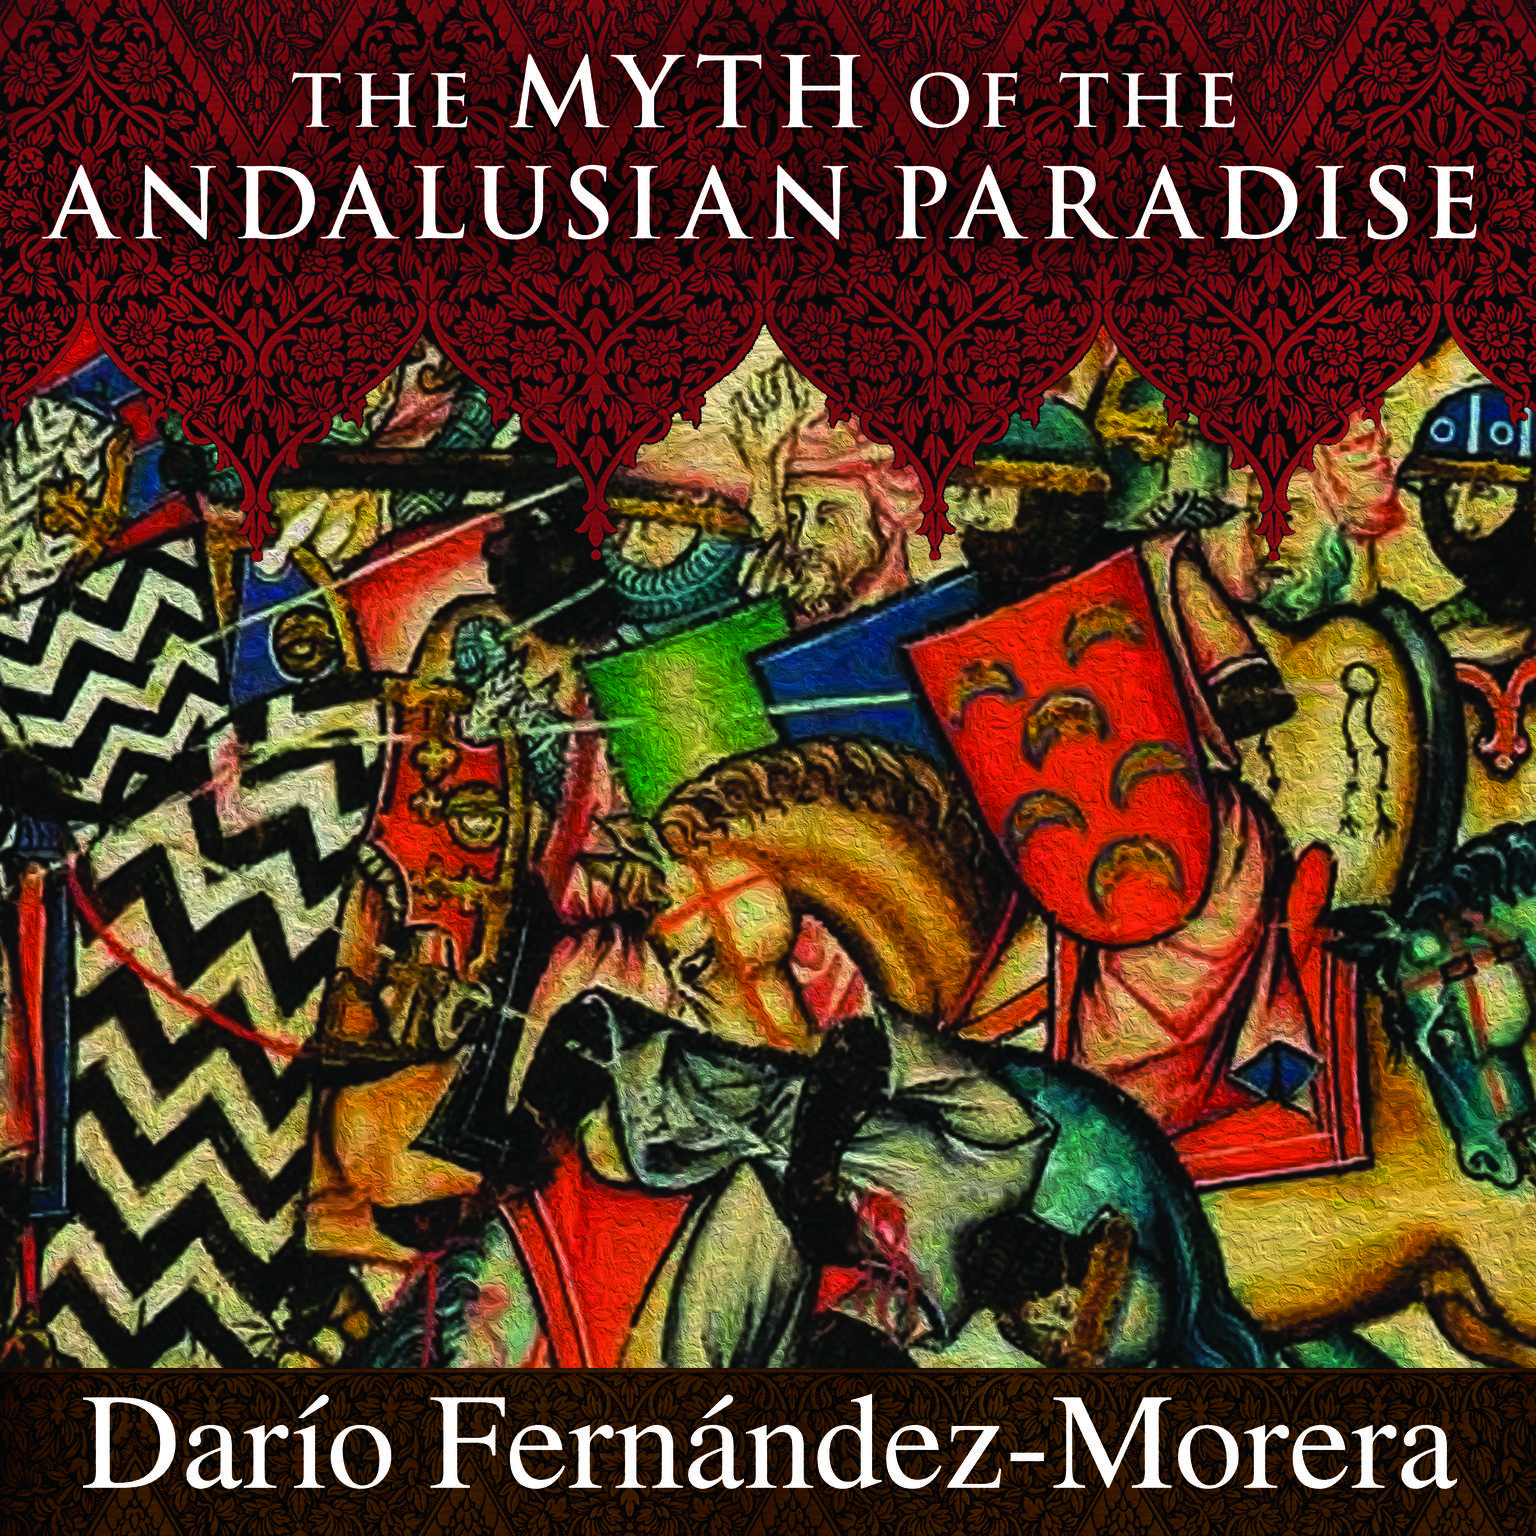 The Myth of the Andalusian Paradise: Muslims, Christians, and Jews under Islamic Rule in Medieval Spain Audiobook, by Darío  Fernández-Morera